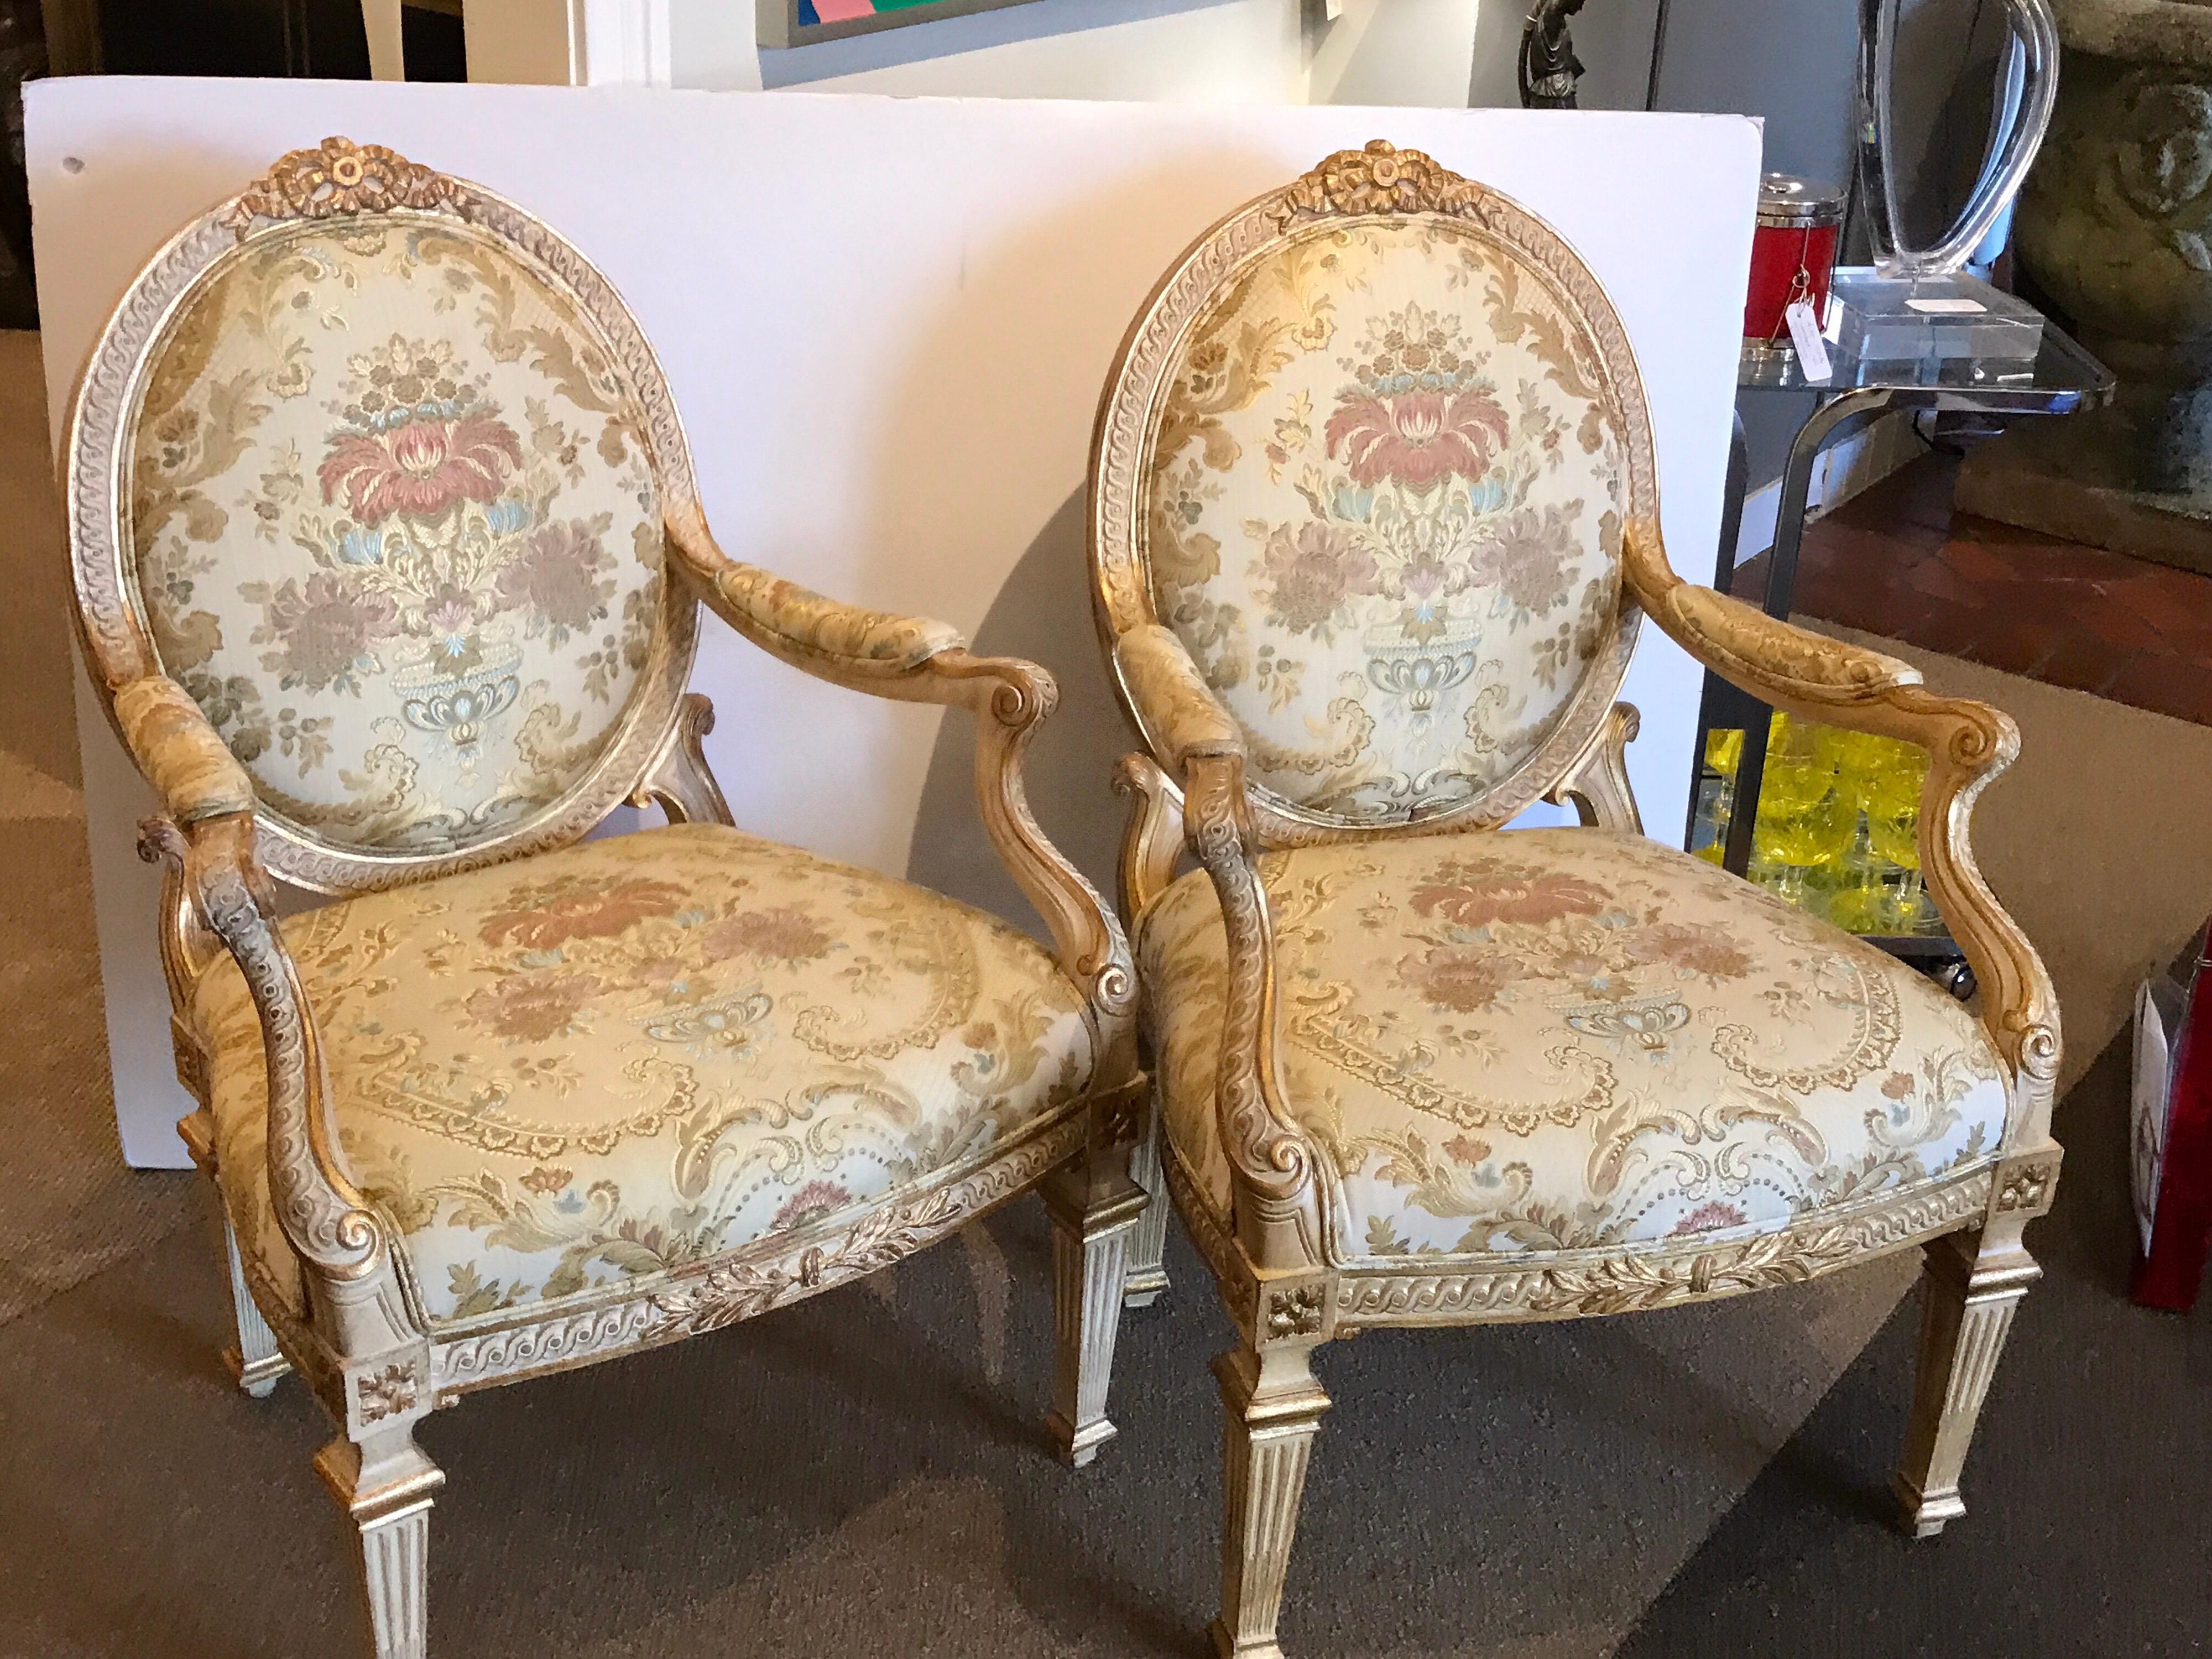 Pair of Italian neoclassic carved giltwood armchairs, each one with medallion backrest, finely carved details, stamped made in Italy.
Measures: Arm height 27